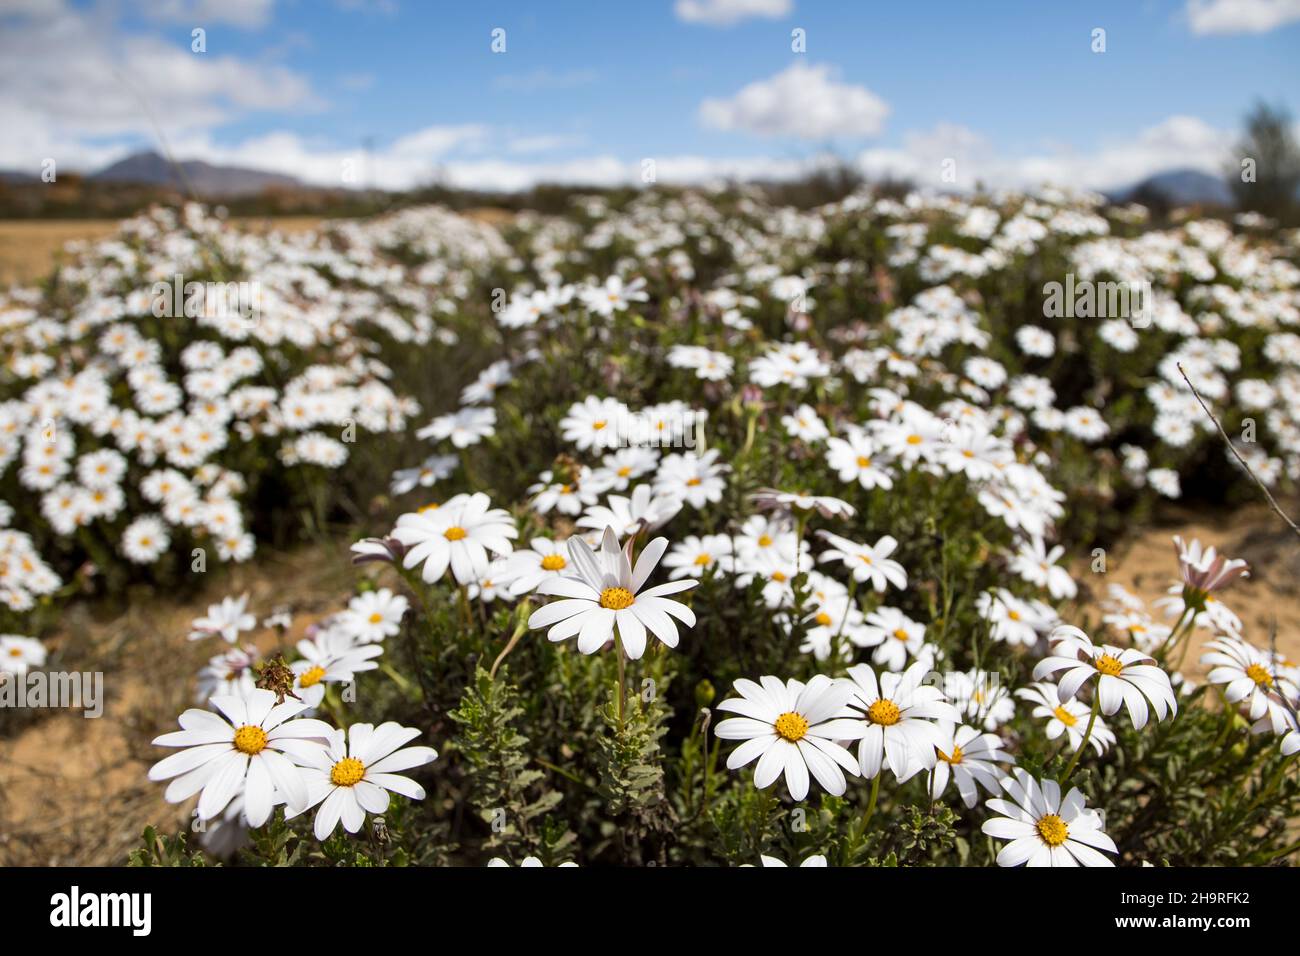 White daisies display of a large field of flowers in the Namaqualand flower season Stock Photo